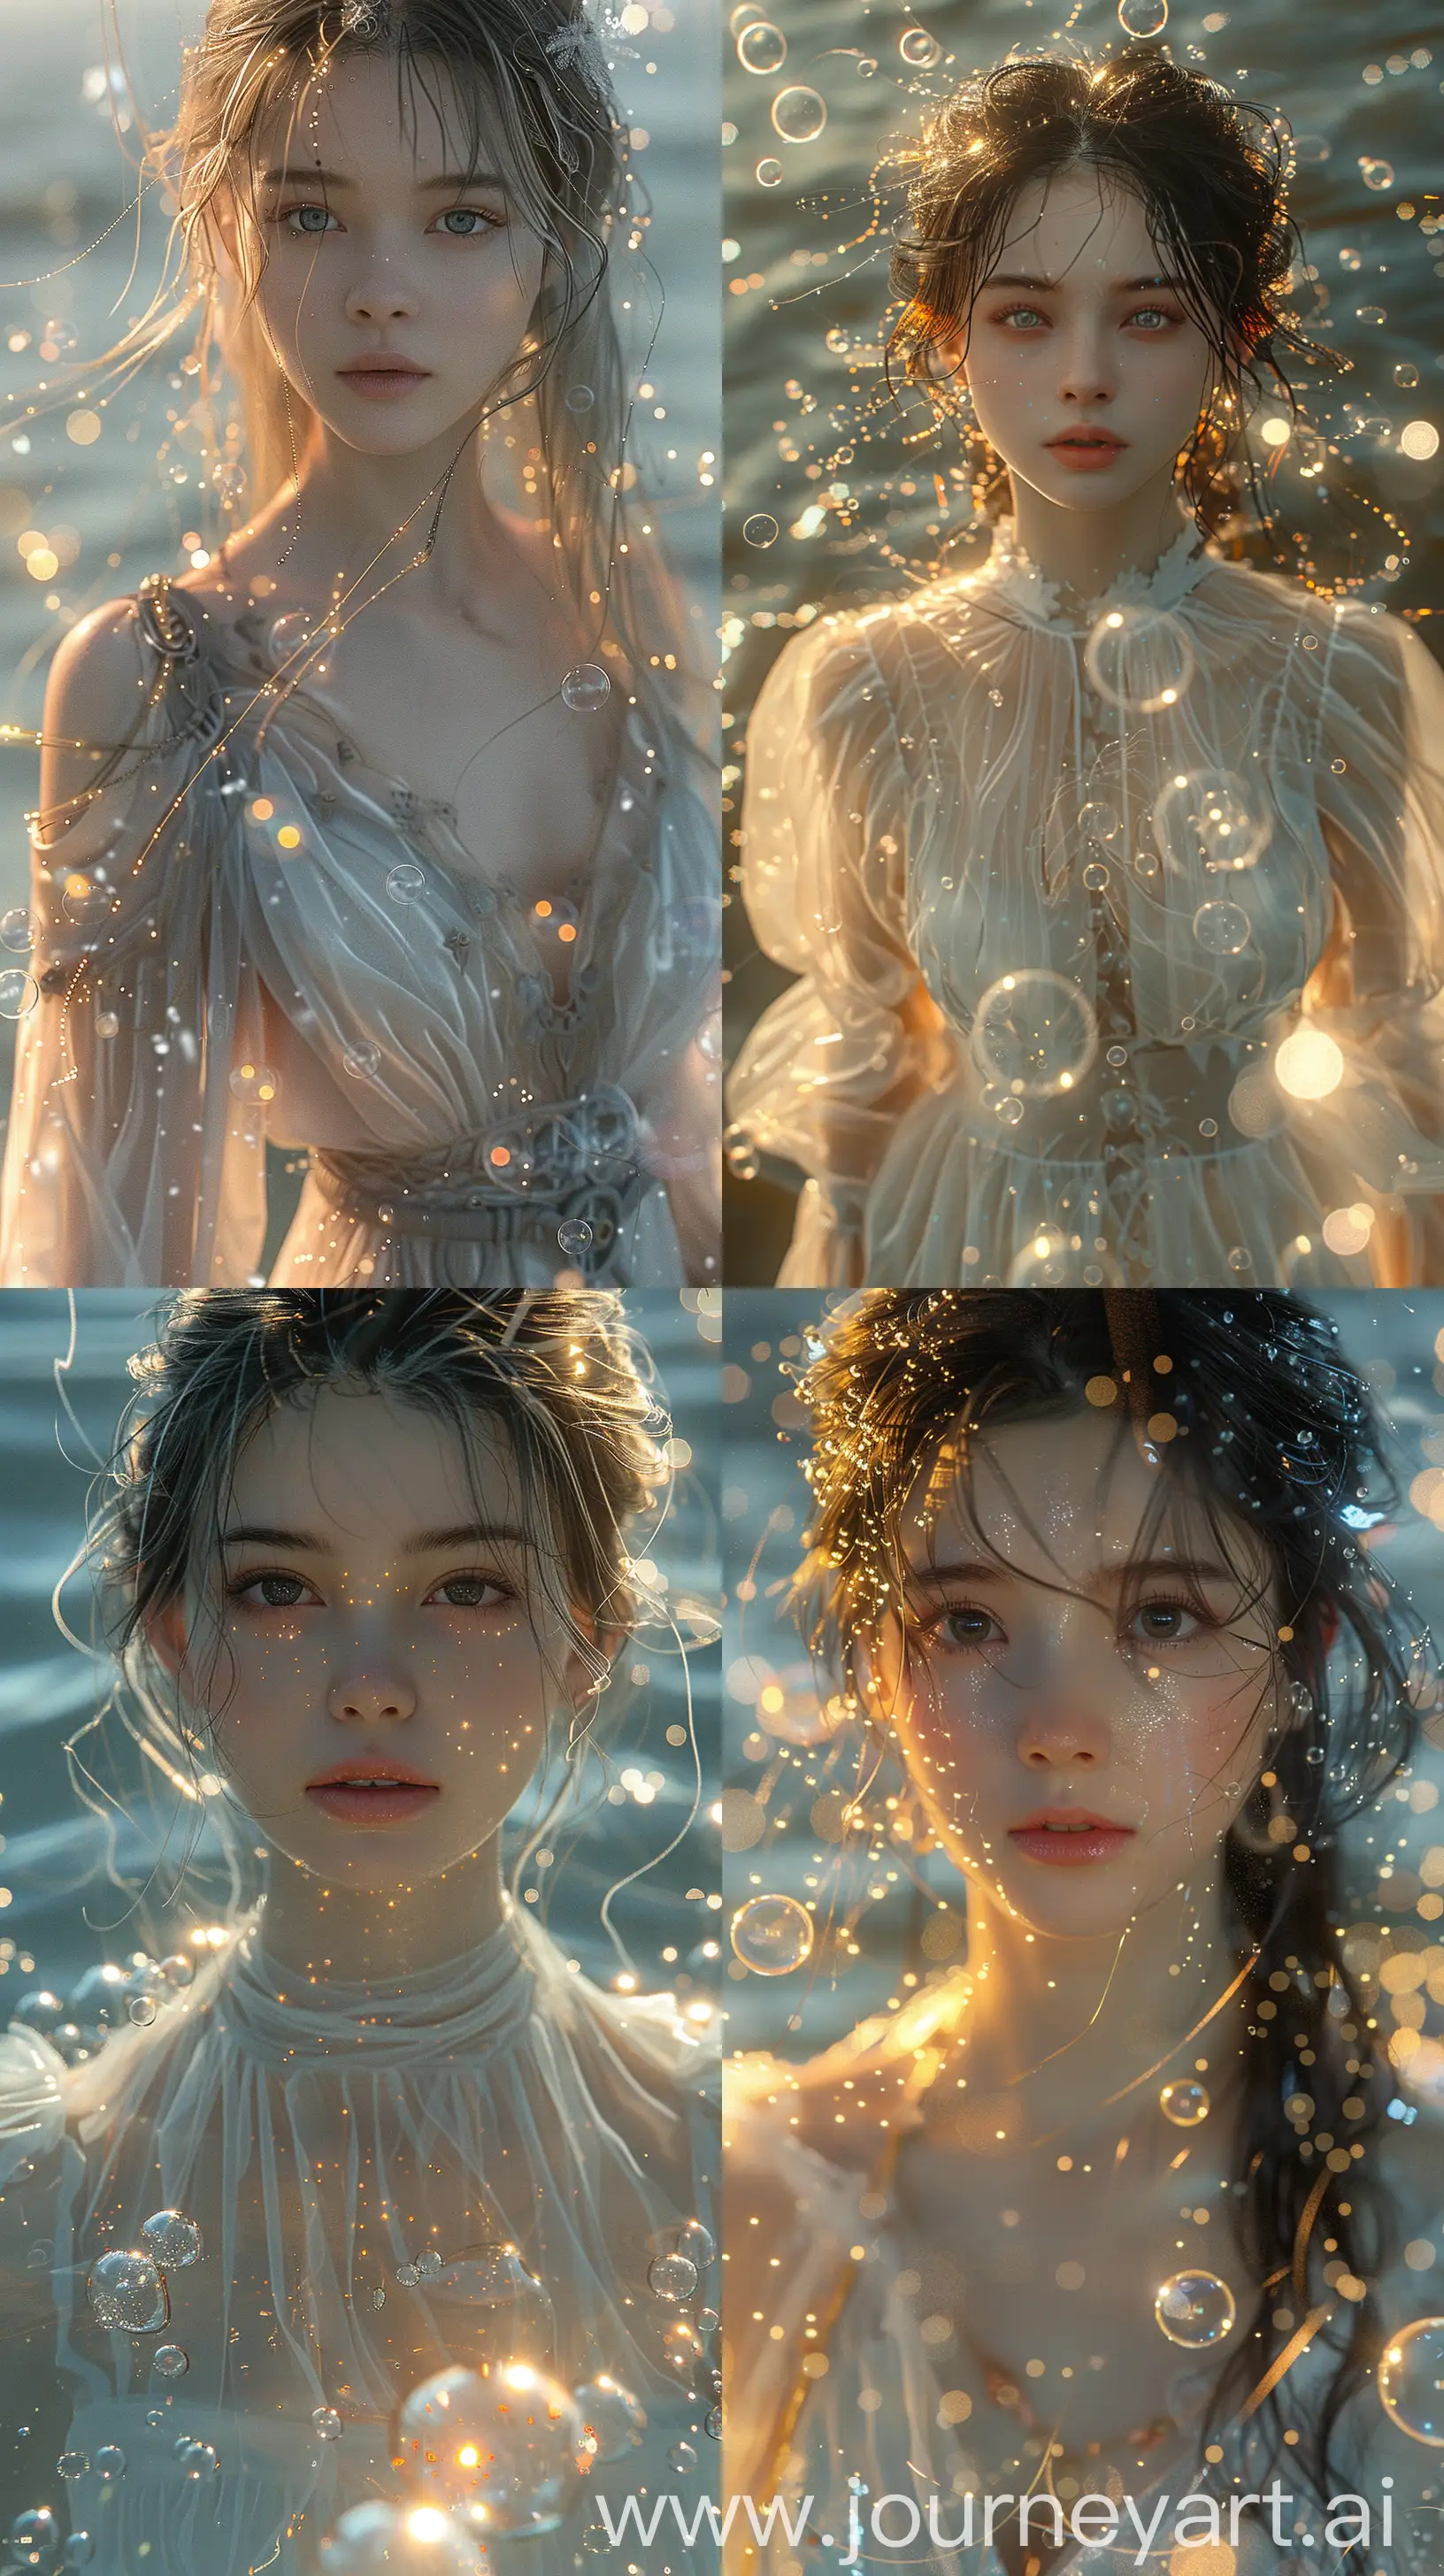 Ethereal-Fantasy-Portrait-Glowing-Water-Threads-and-Ethereal-Drapery